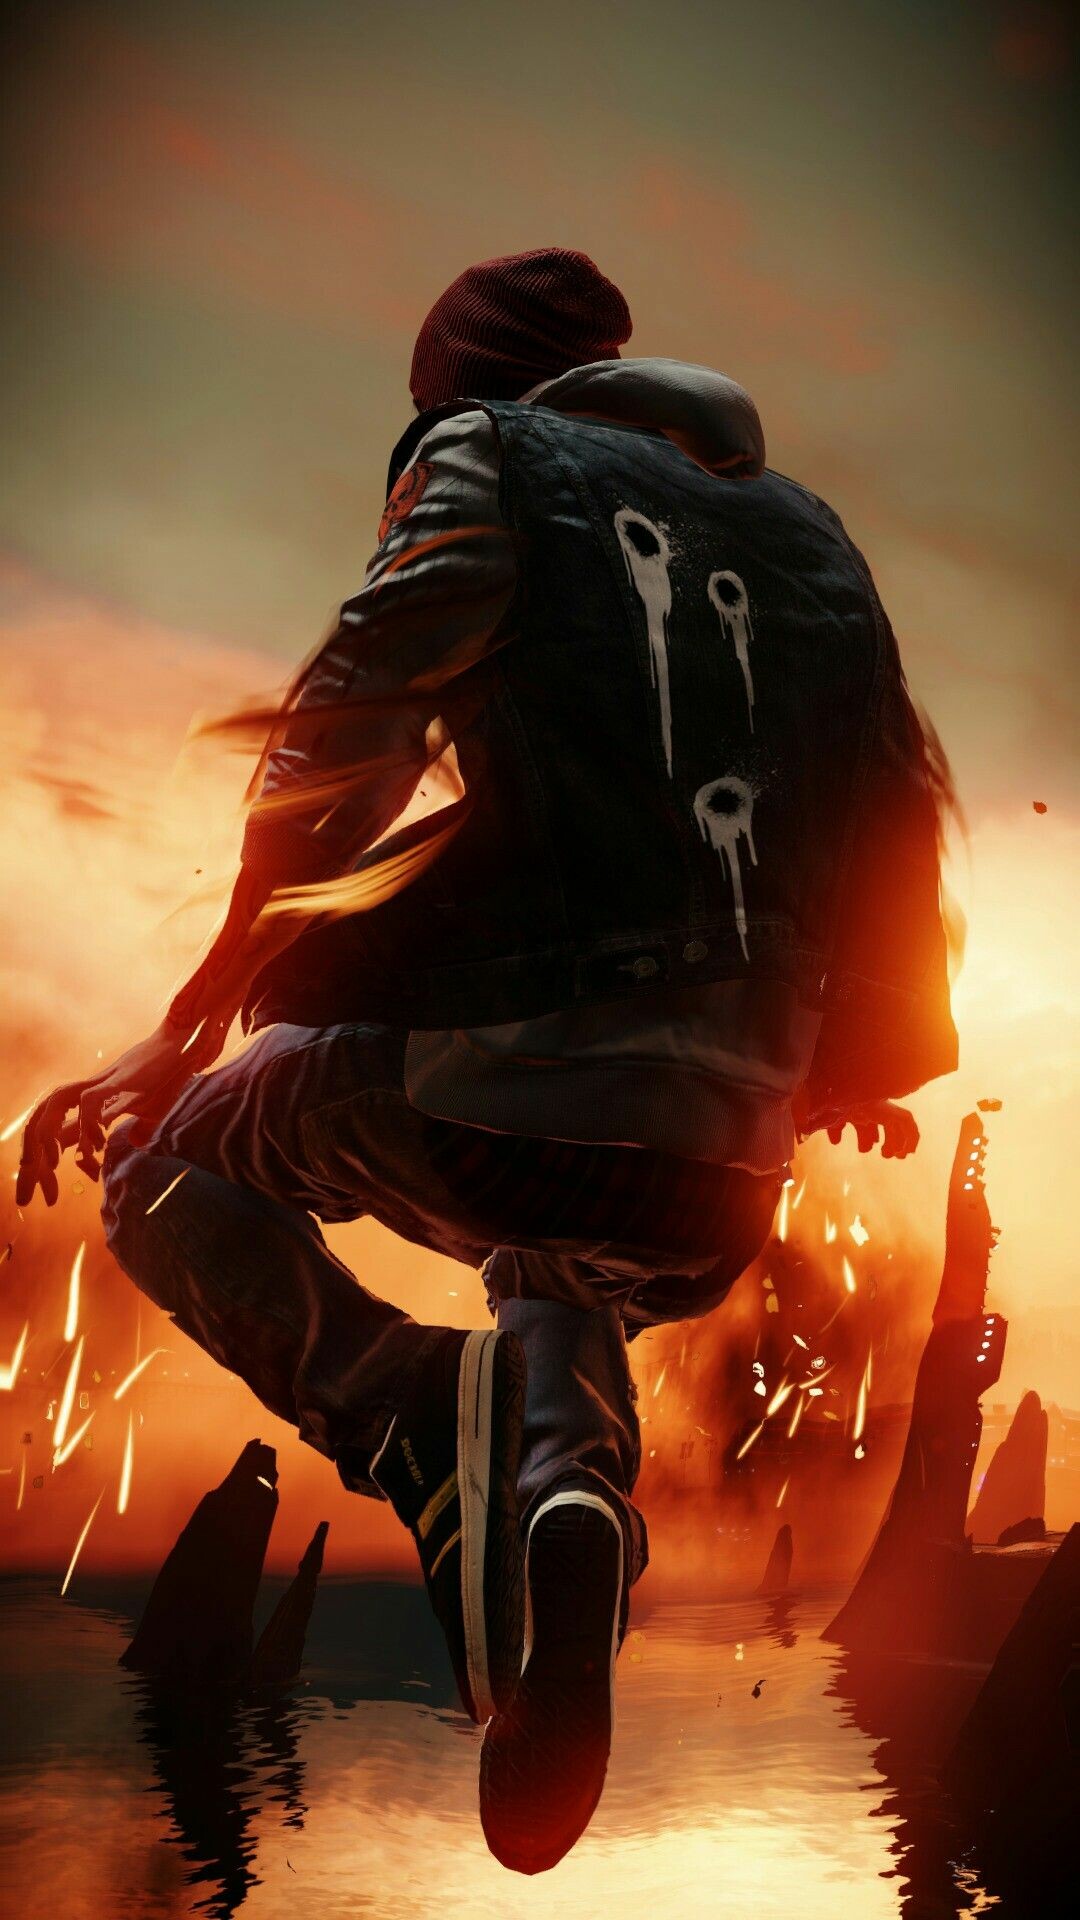 inFAMOUS: Delsin Rowe, Fighting the Department of Unified Protection. 1080x1920 Full HD Wallpaper.